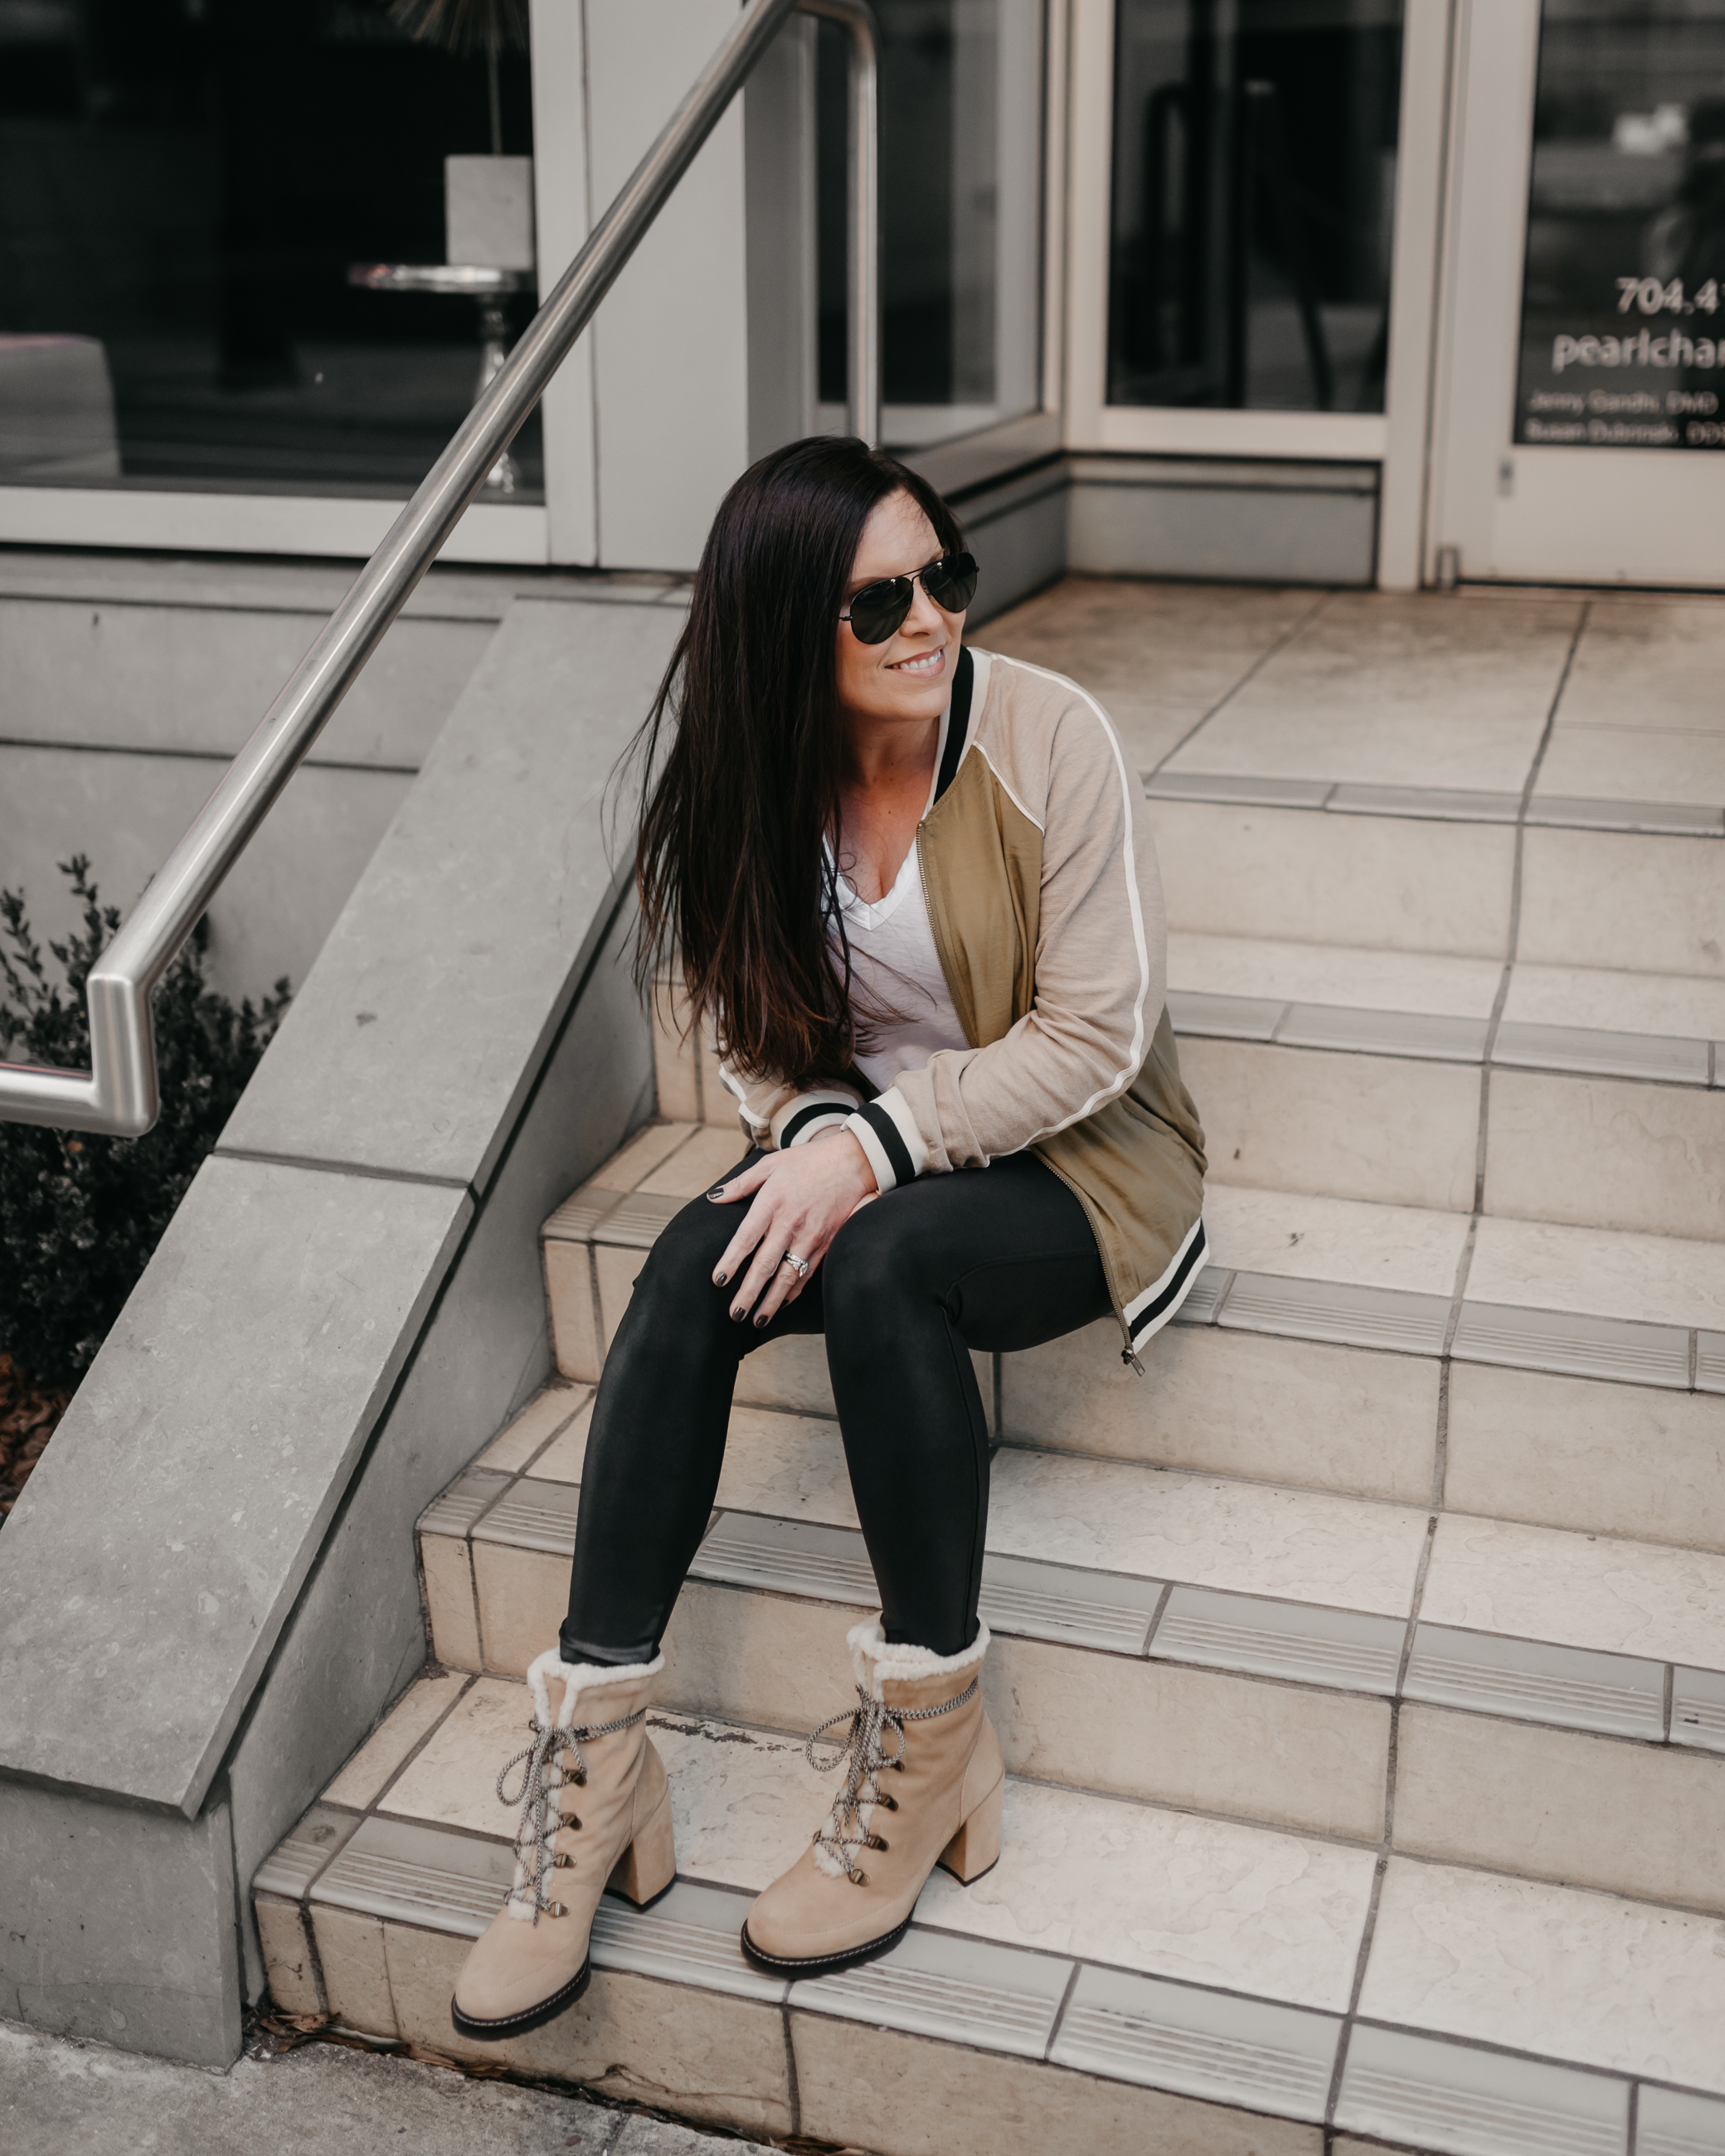 clean chic sophisticated style with bomber jacket, leggings and booties